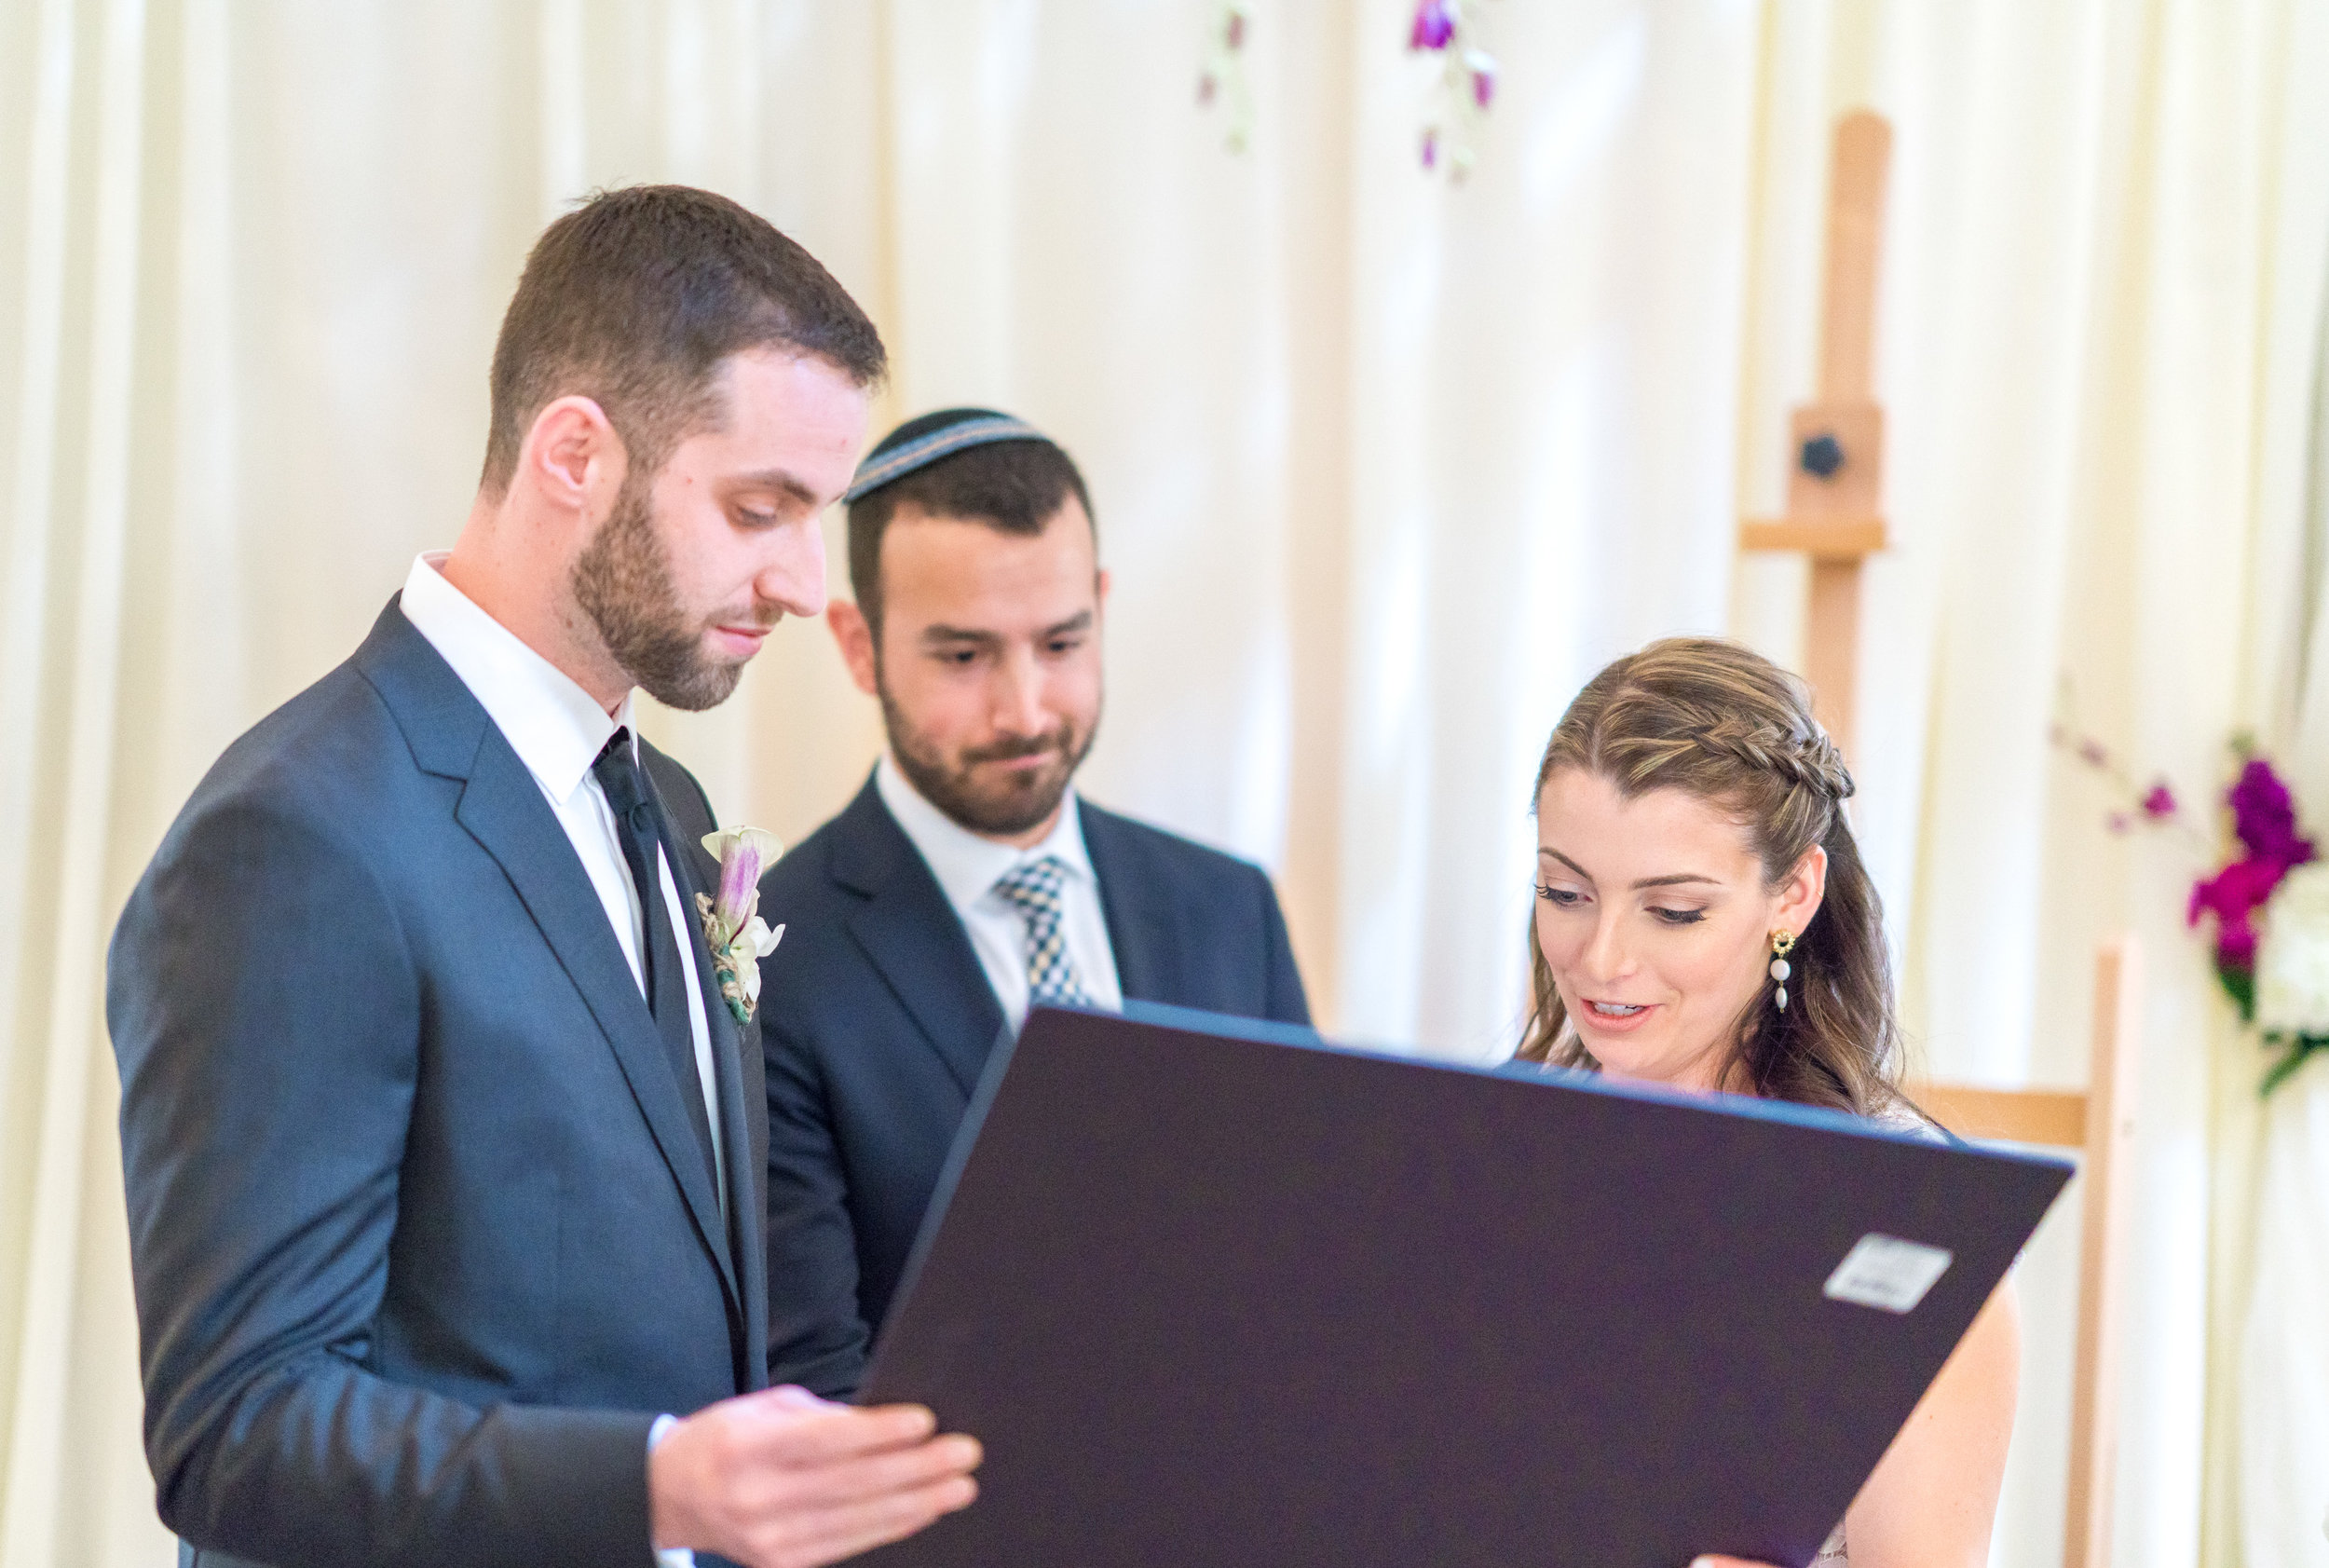 Jewish wedding ceremony indoors at La Ferme Restaurant in Chevy Chase